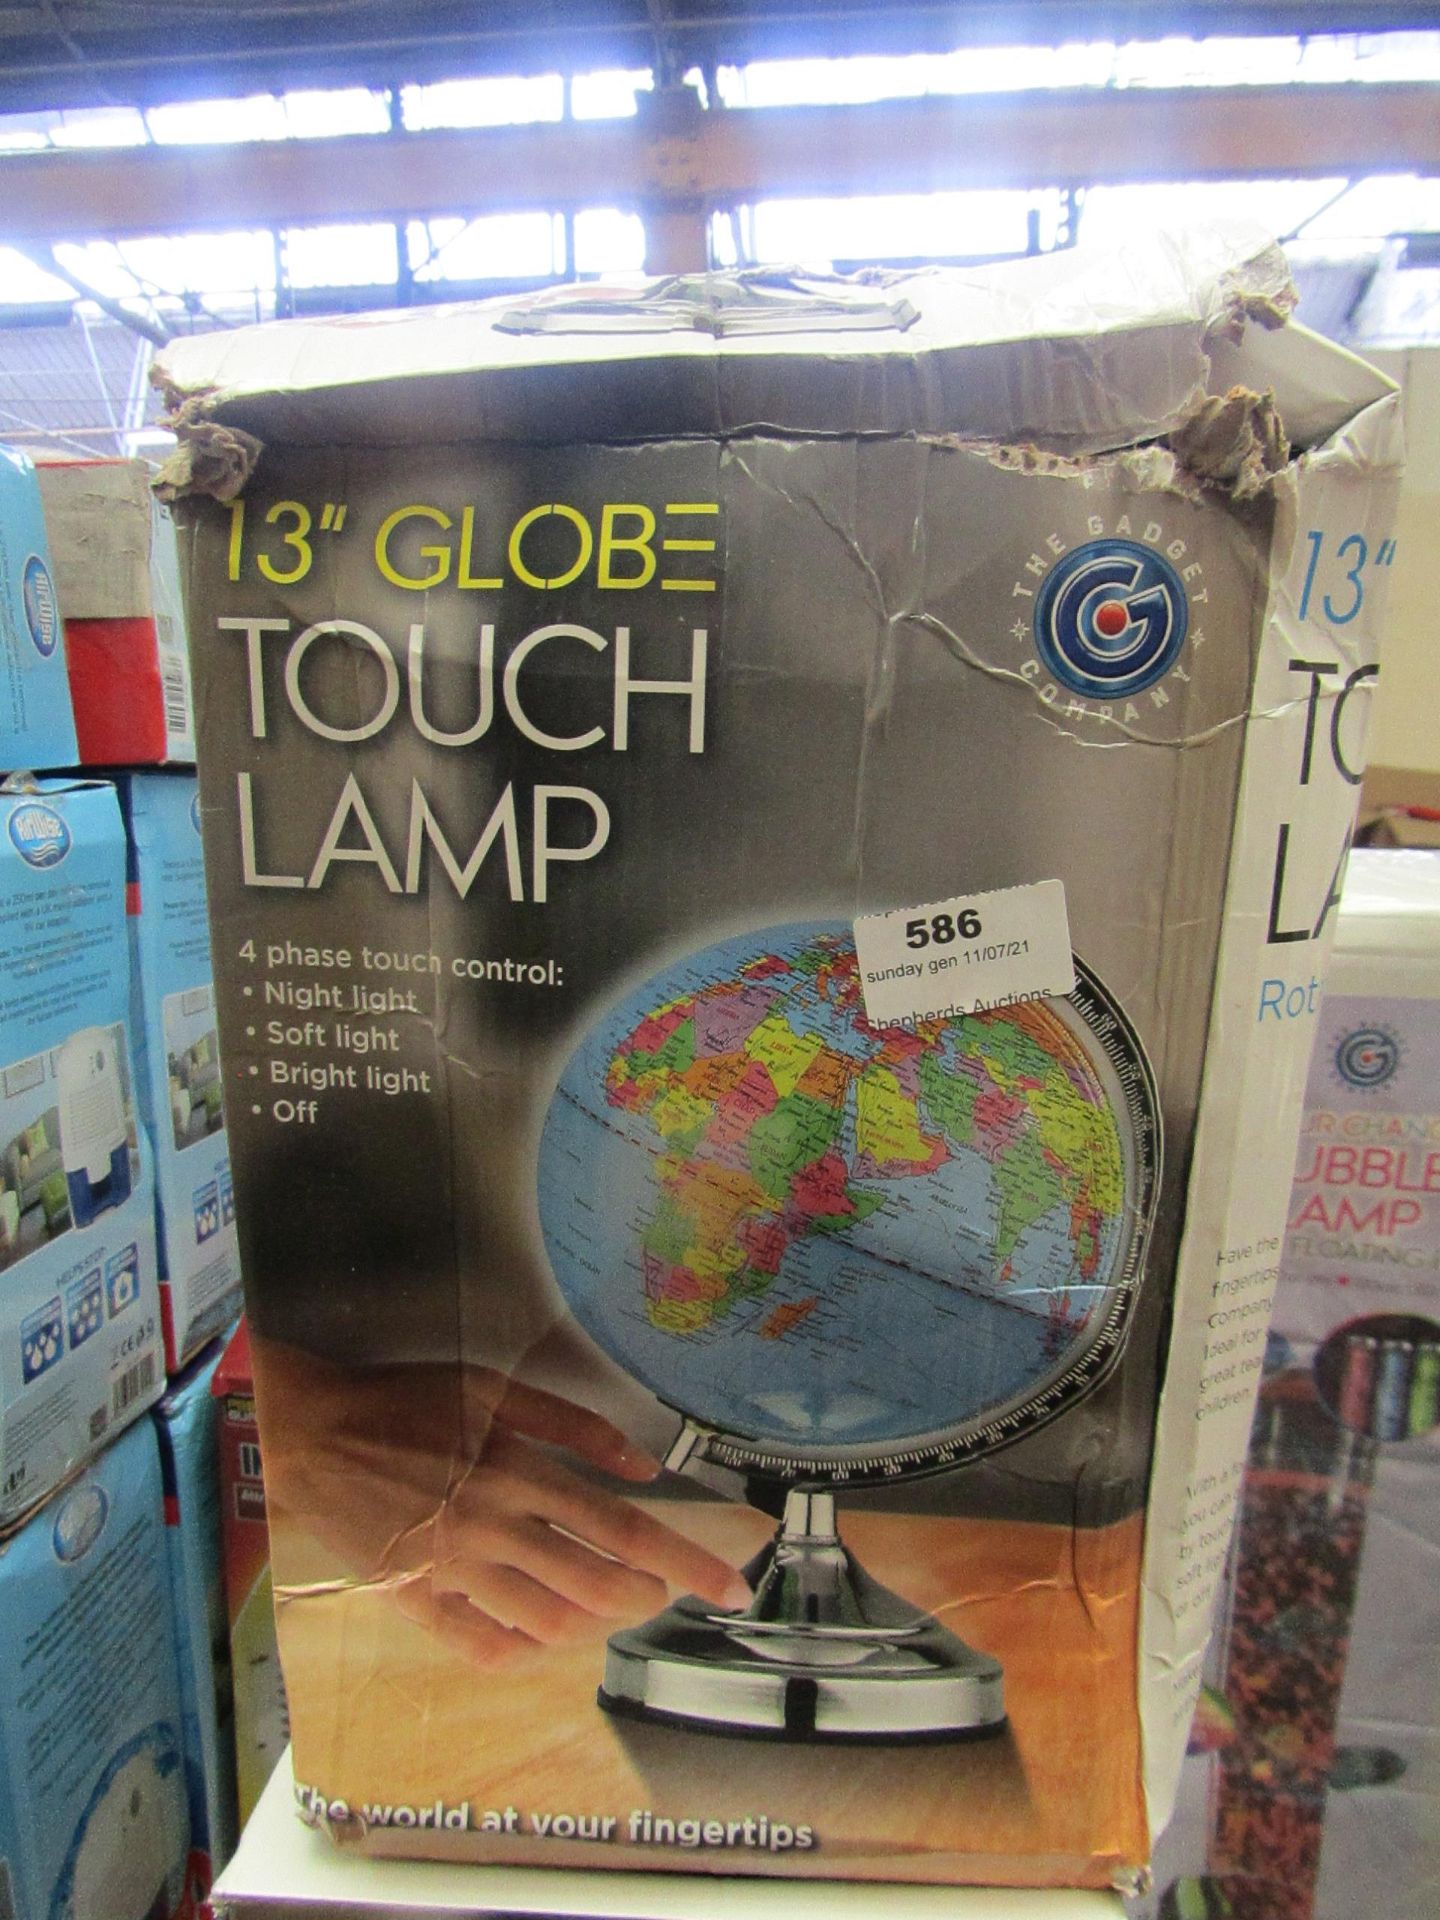 3x the gadget company 13" globe touch lamp, unchecked & boxed.